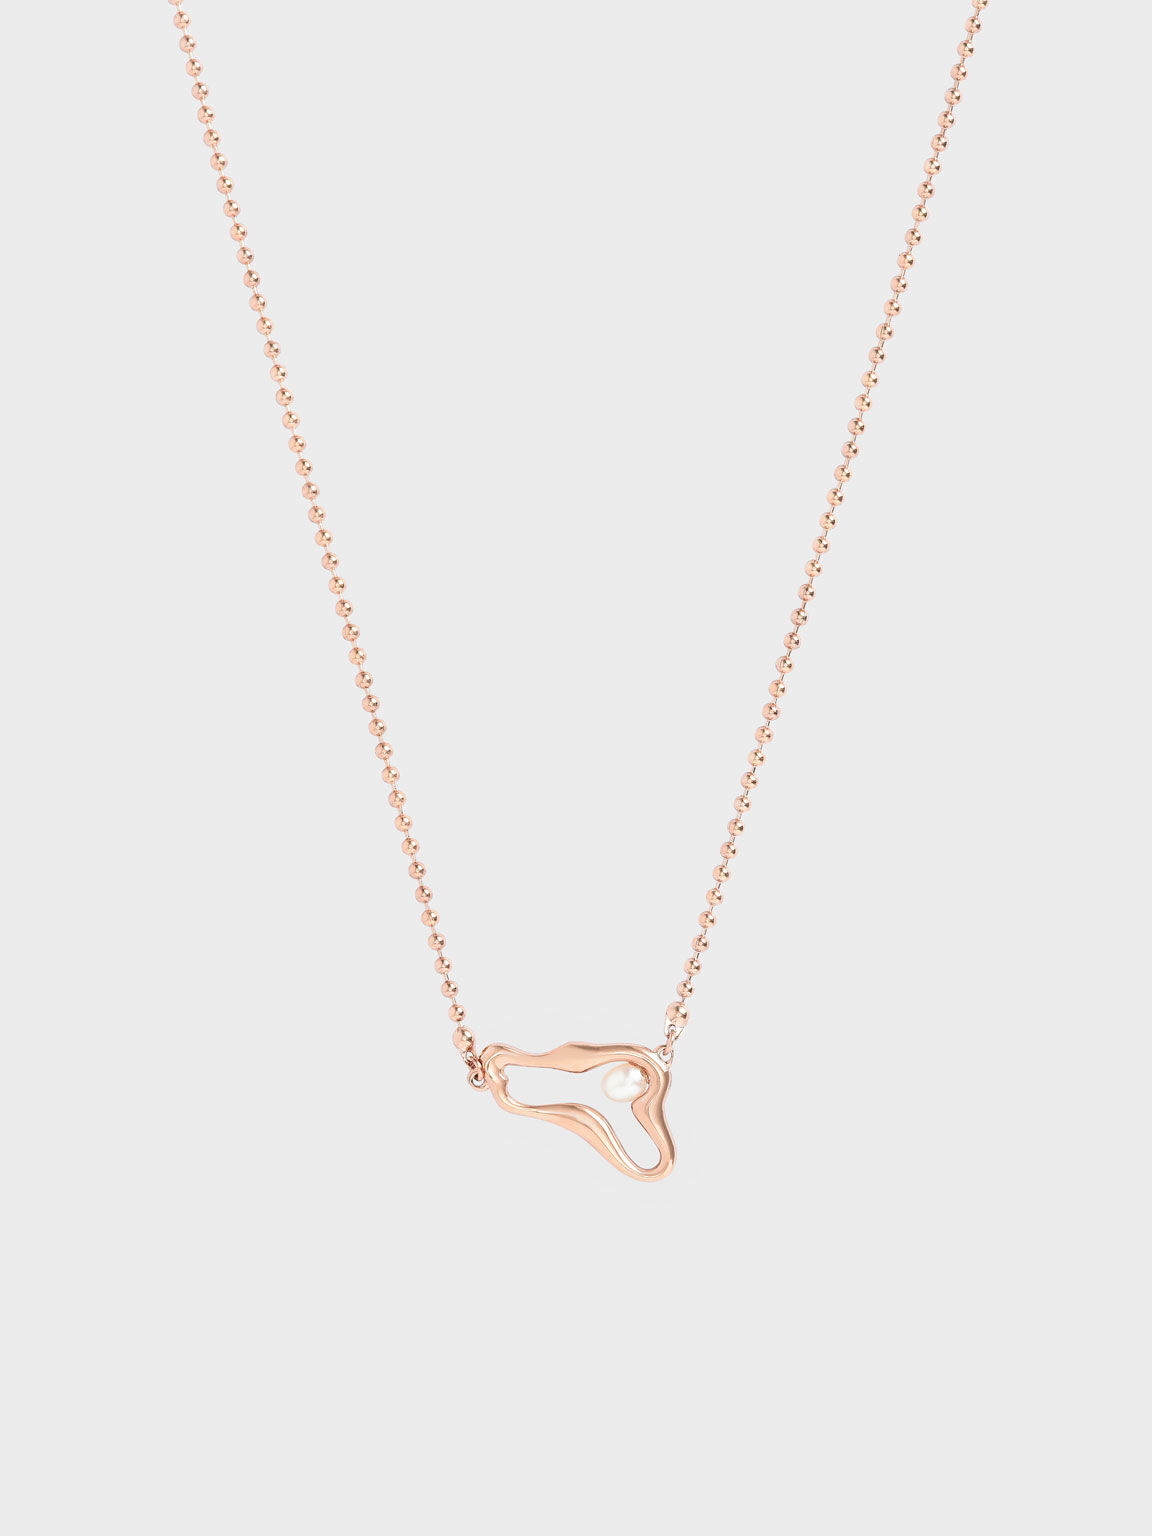 Sculpted Pendant Bead Necklace, Rose Gold, hi-res